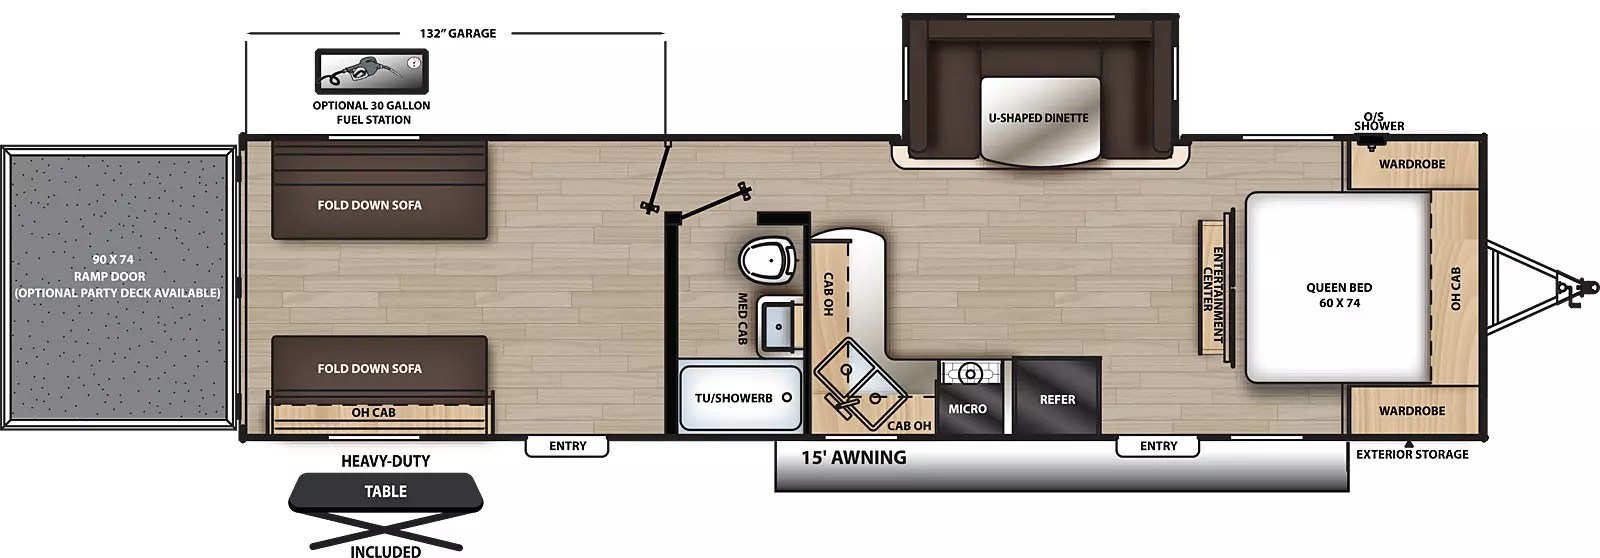 The 29THS has one slide out two entry doors. Exterior features include a 15 foot awning, front exterior storage, outside shower, heavy-duty table, and rear ramp door. Interior layout front to back: foot facing queen bed with overhead cabinet and wardrobes on either side; island entertainment center along inner wall; off-door side u-dinette slide out; door side entry, refrigerator, cook top stove, microwave, corner sink, overhead cabinet, and counter that wraps to inner wall; door side full bathroom with medicine cabinet; rear garage with opposing fold-down sofas with overhead cabinet on door side, and second entry. Optional 30 gallon fuel station available. Optional party deck available on rear ramp door. Garage Dimensions: 132 inches from rear ramp to bathroom wall.